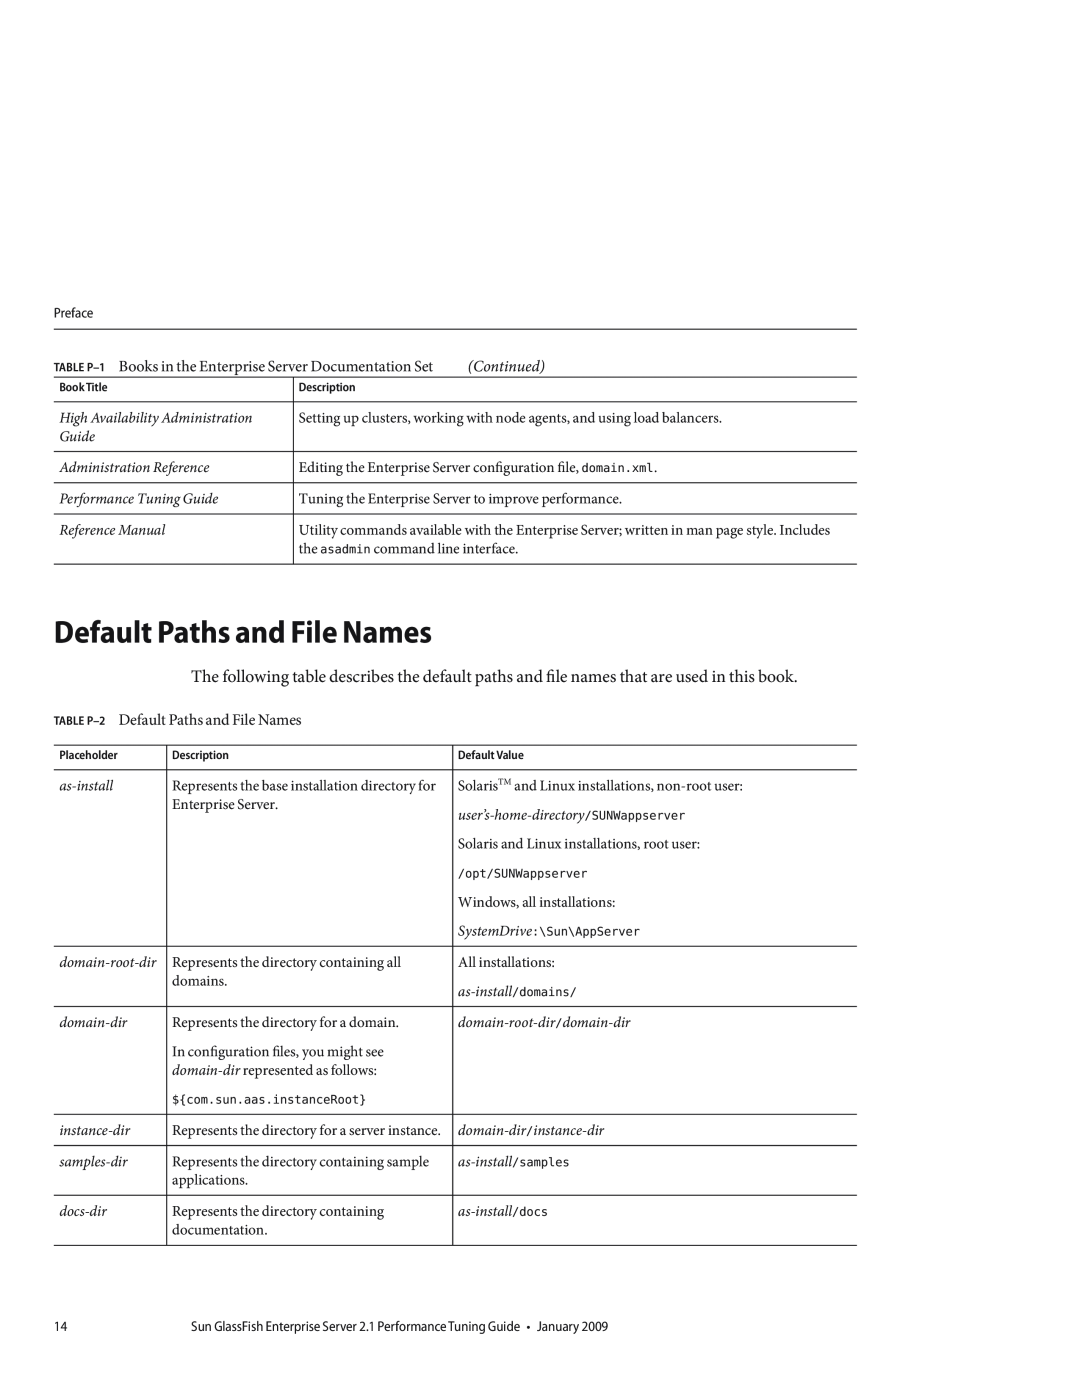 Sun Microsystems 820434310 manual Default Paths and File Names, TABLE P-1 Books in the Enterprise Server Documentation Set 